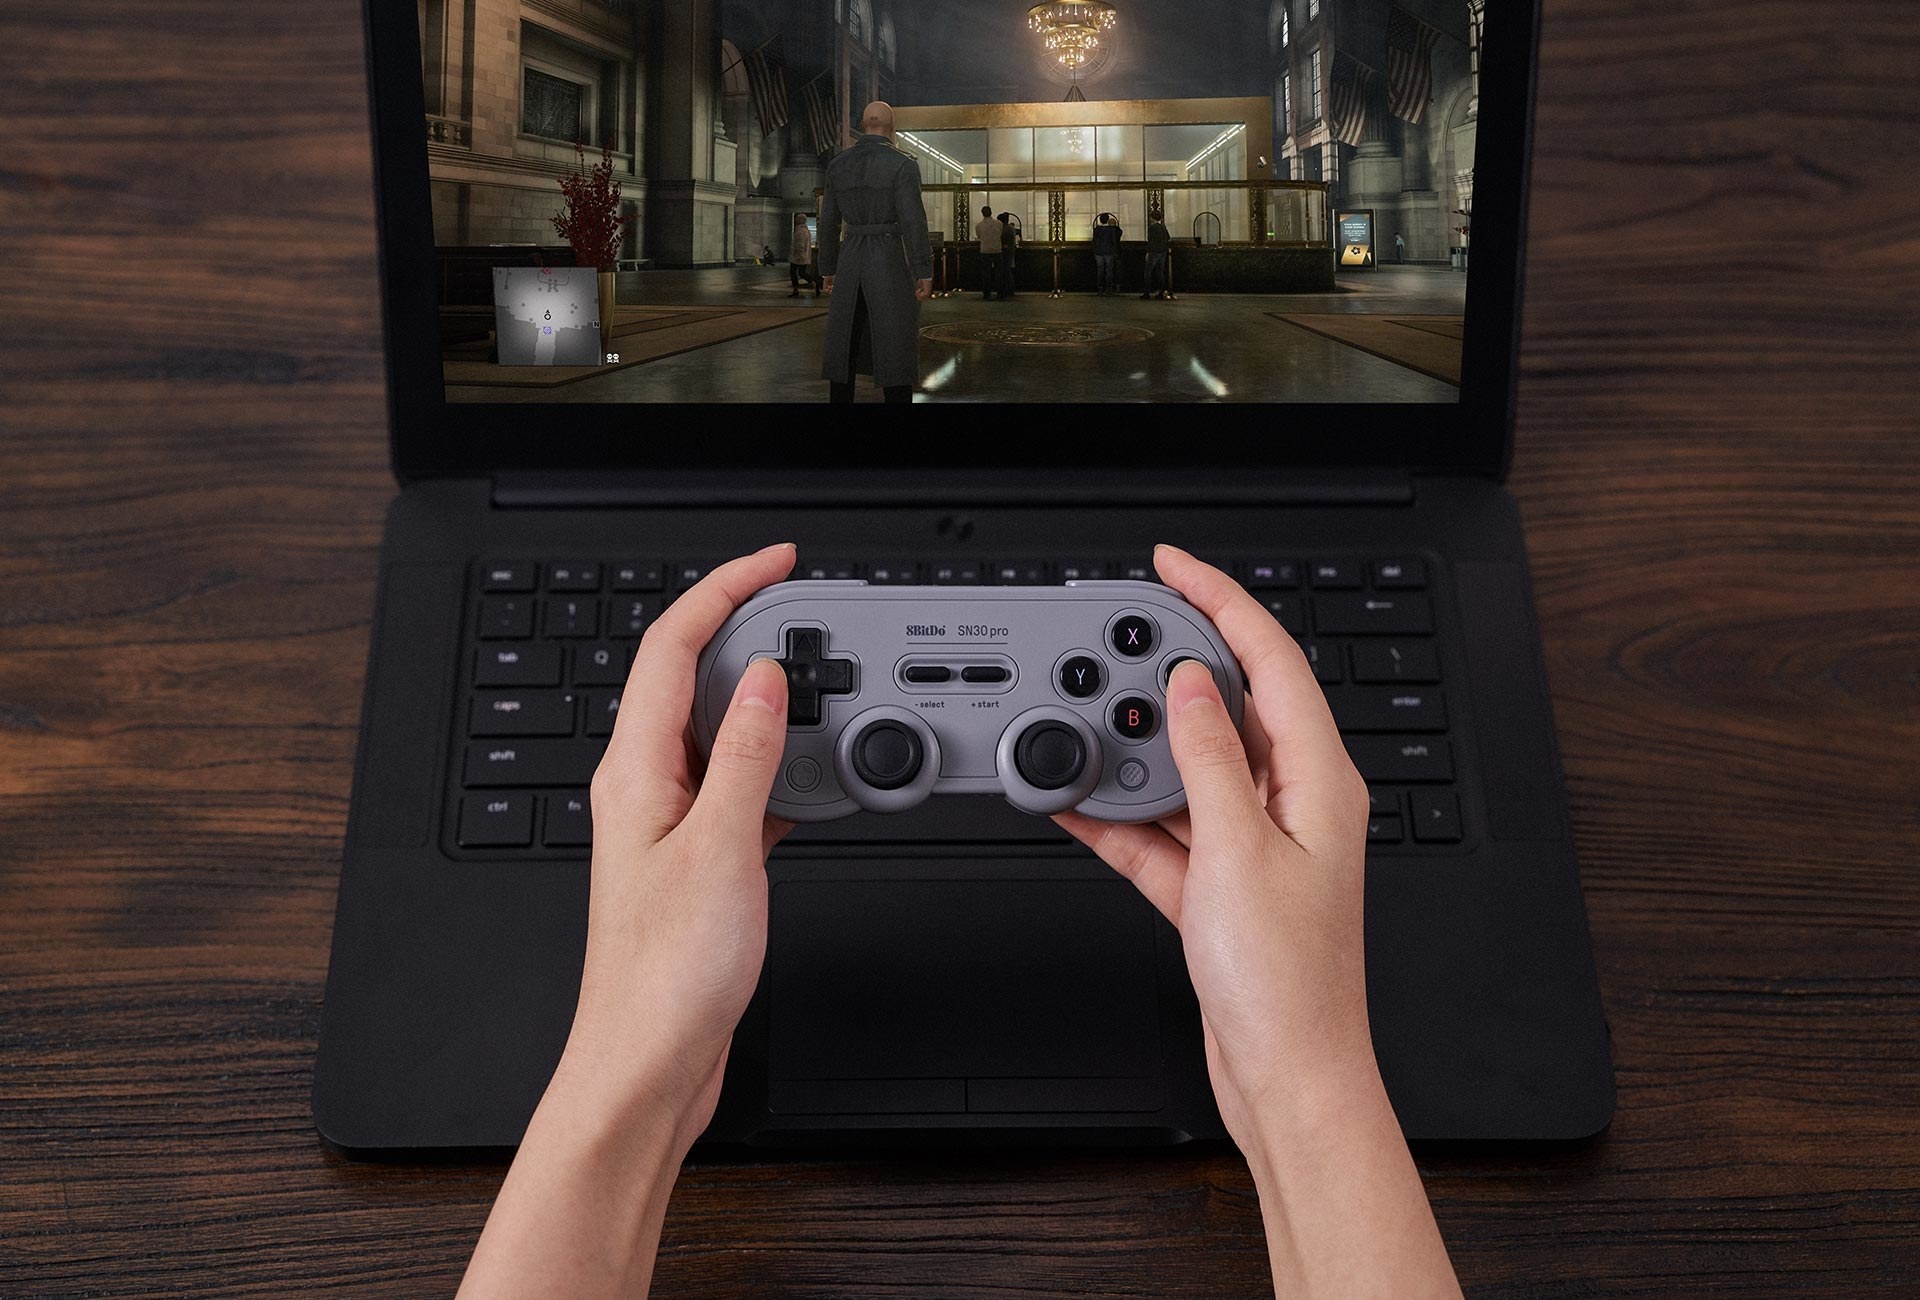 Someone using the controller to play a video game on a laptop